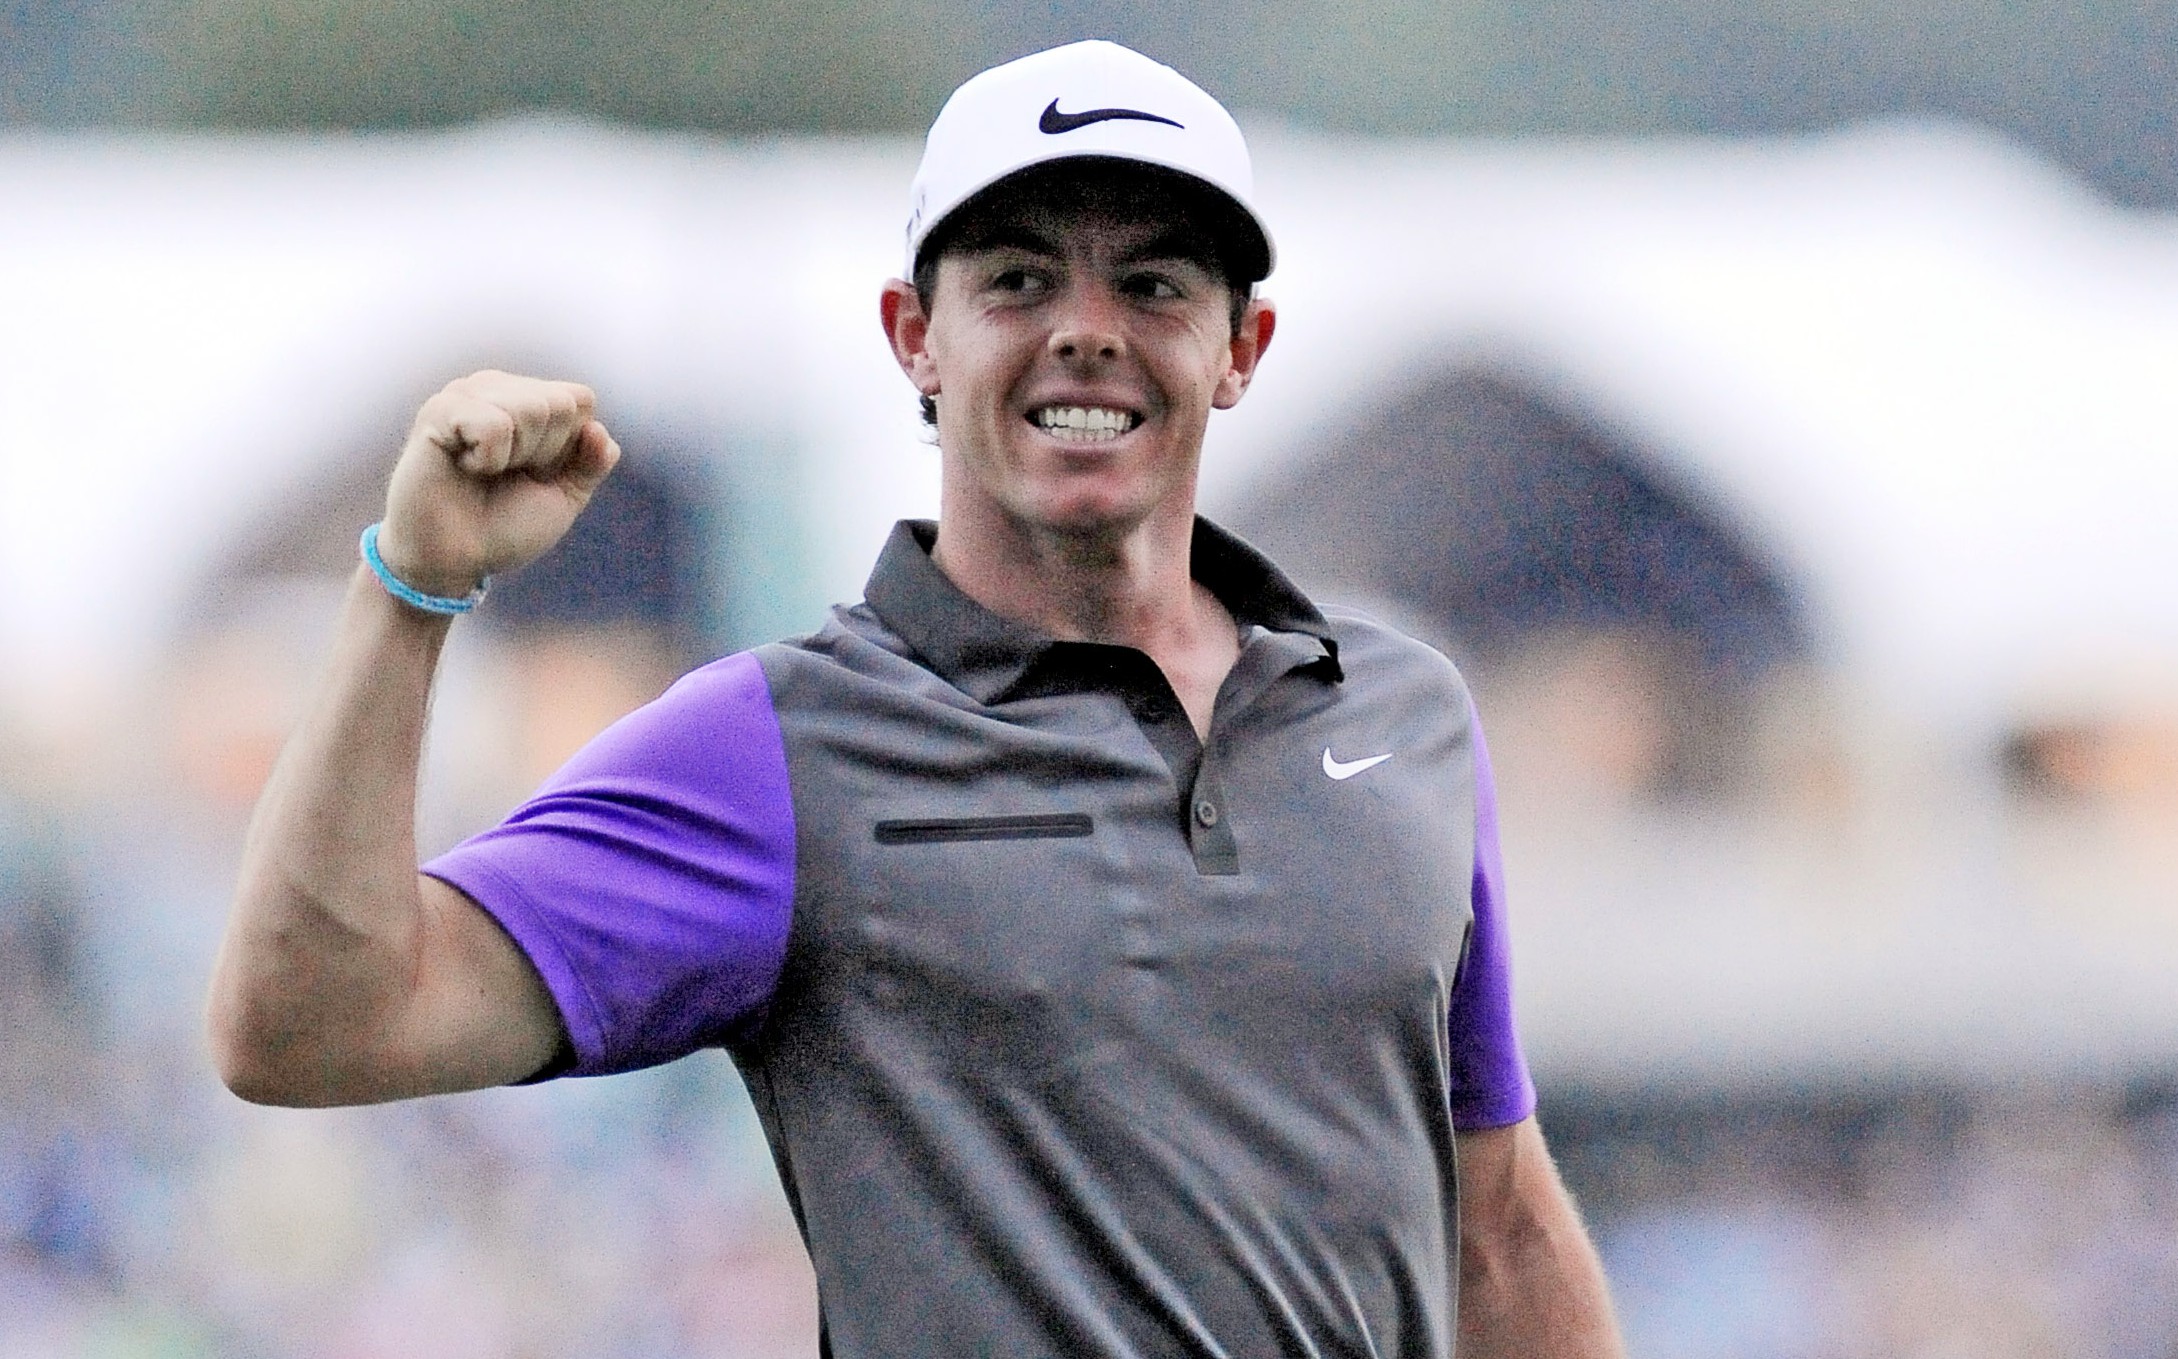 Rory McIlroy Is A Go For FedEx Playoffs